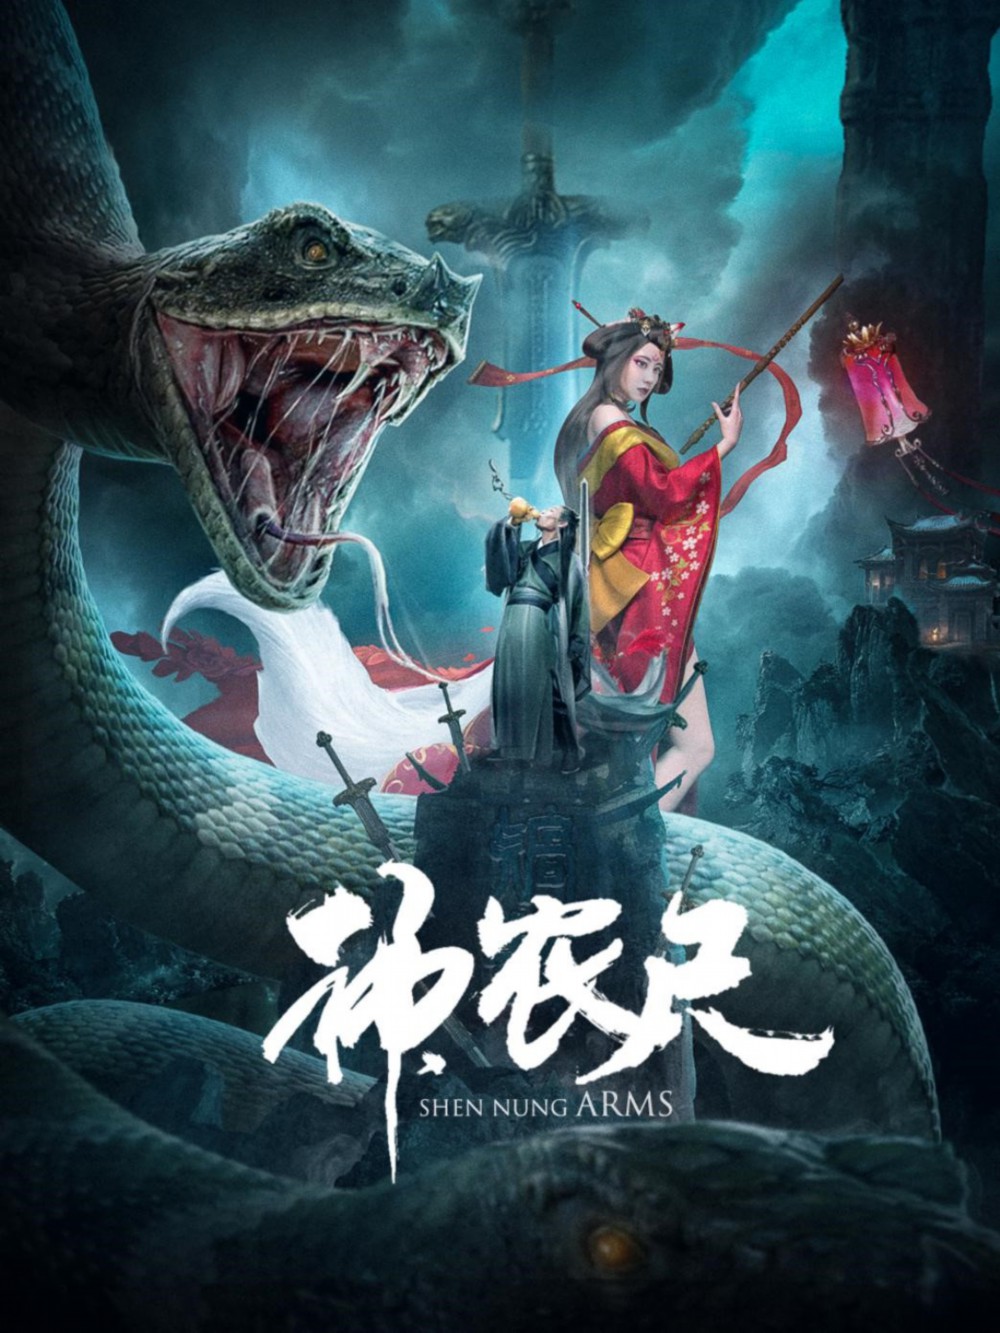 Sword of Shennong (2020) Hindi Dubbed (VoiceOver) 720p HDRip 750MB Free Download